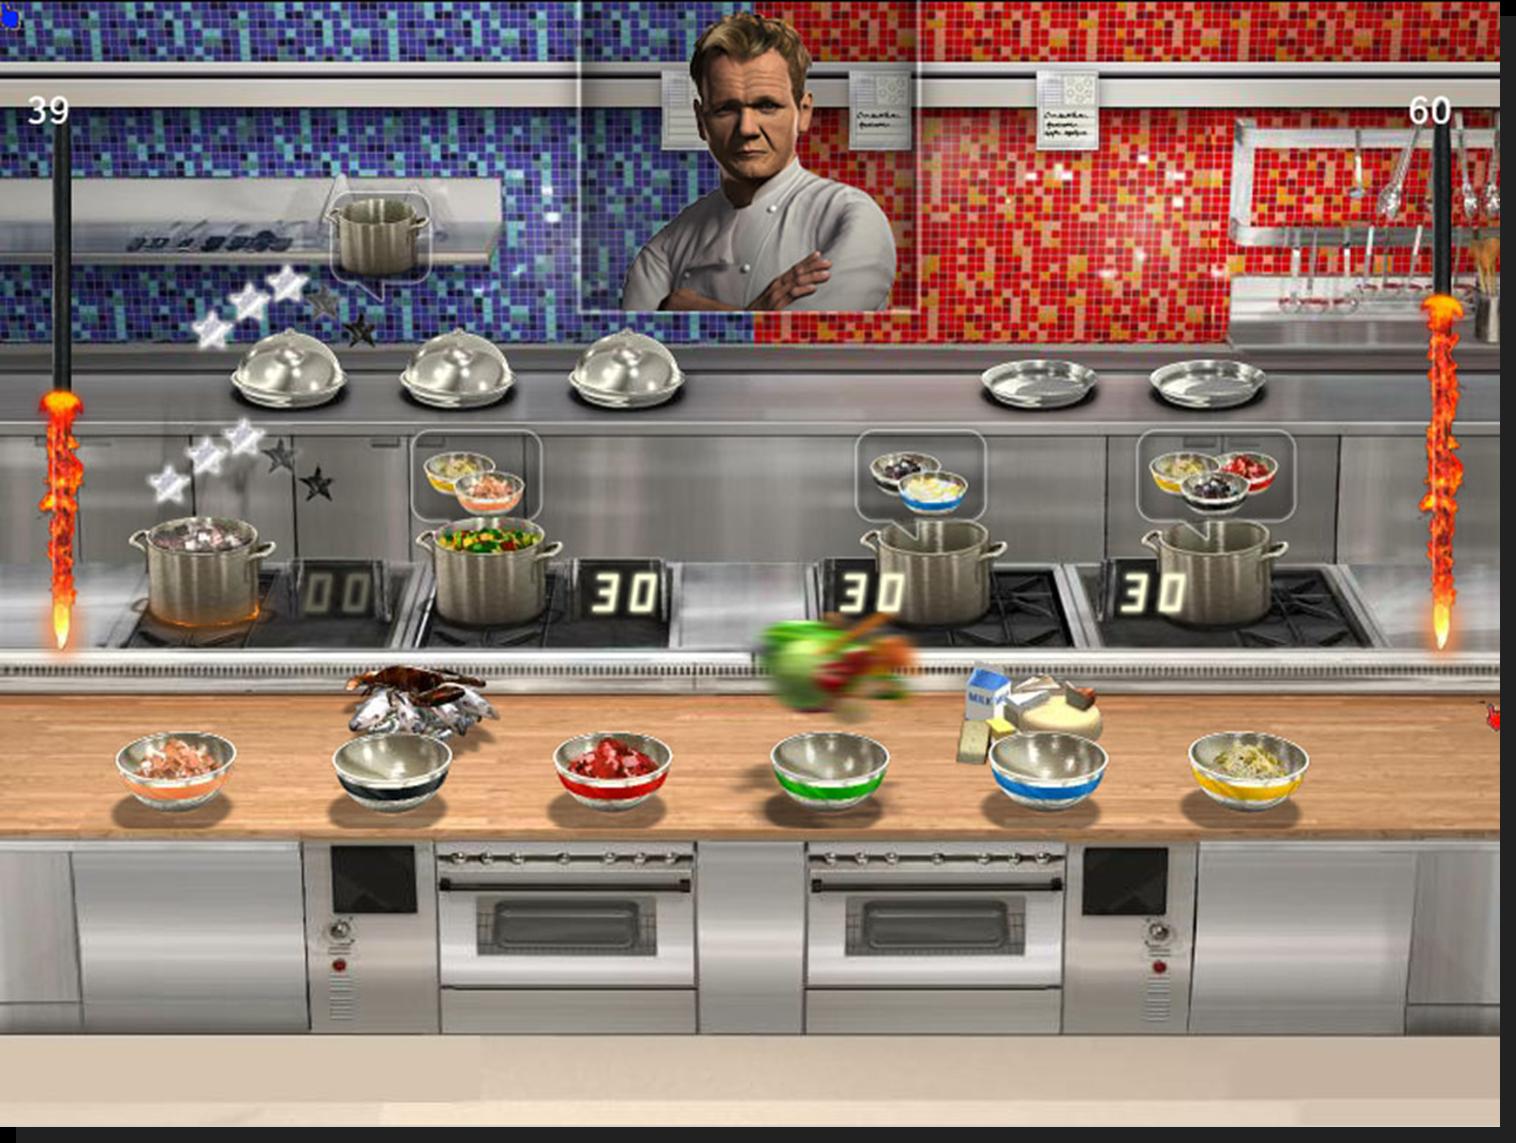 Marketing Gone Wild: The Hell's Kitchen Video Game - Eater NY